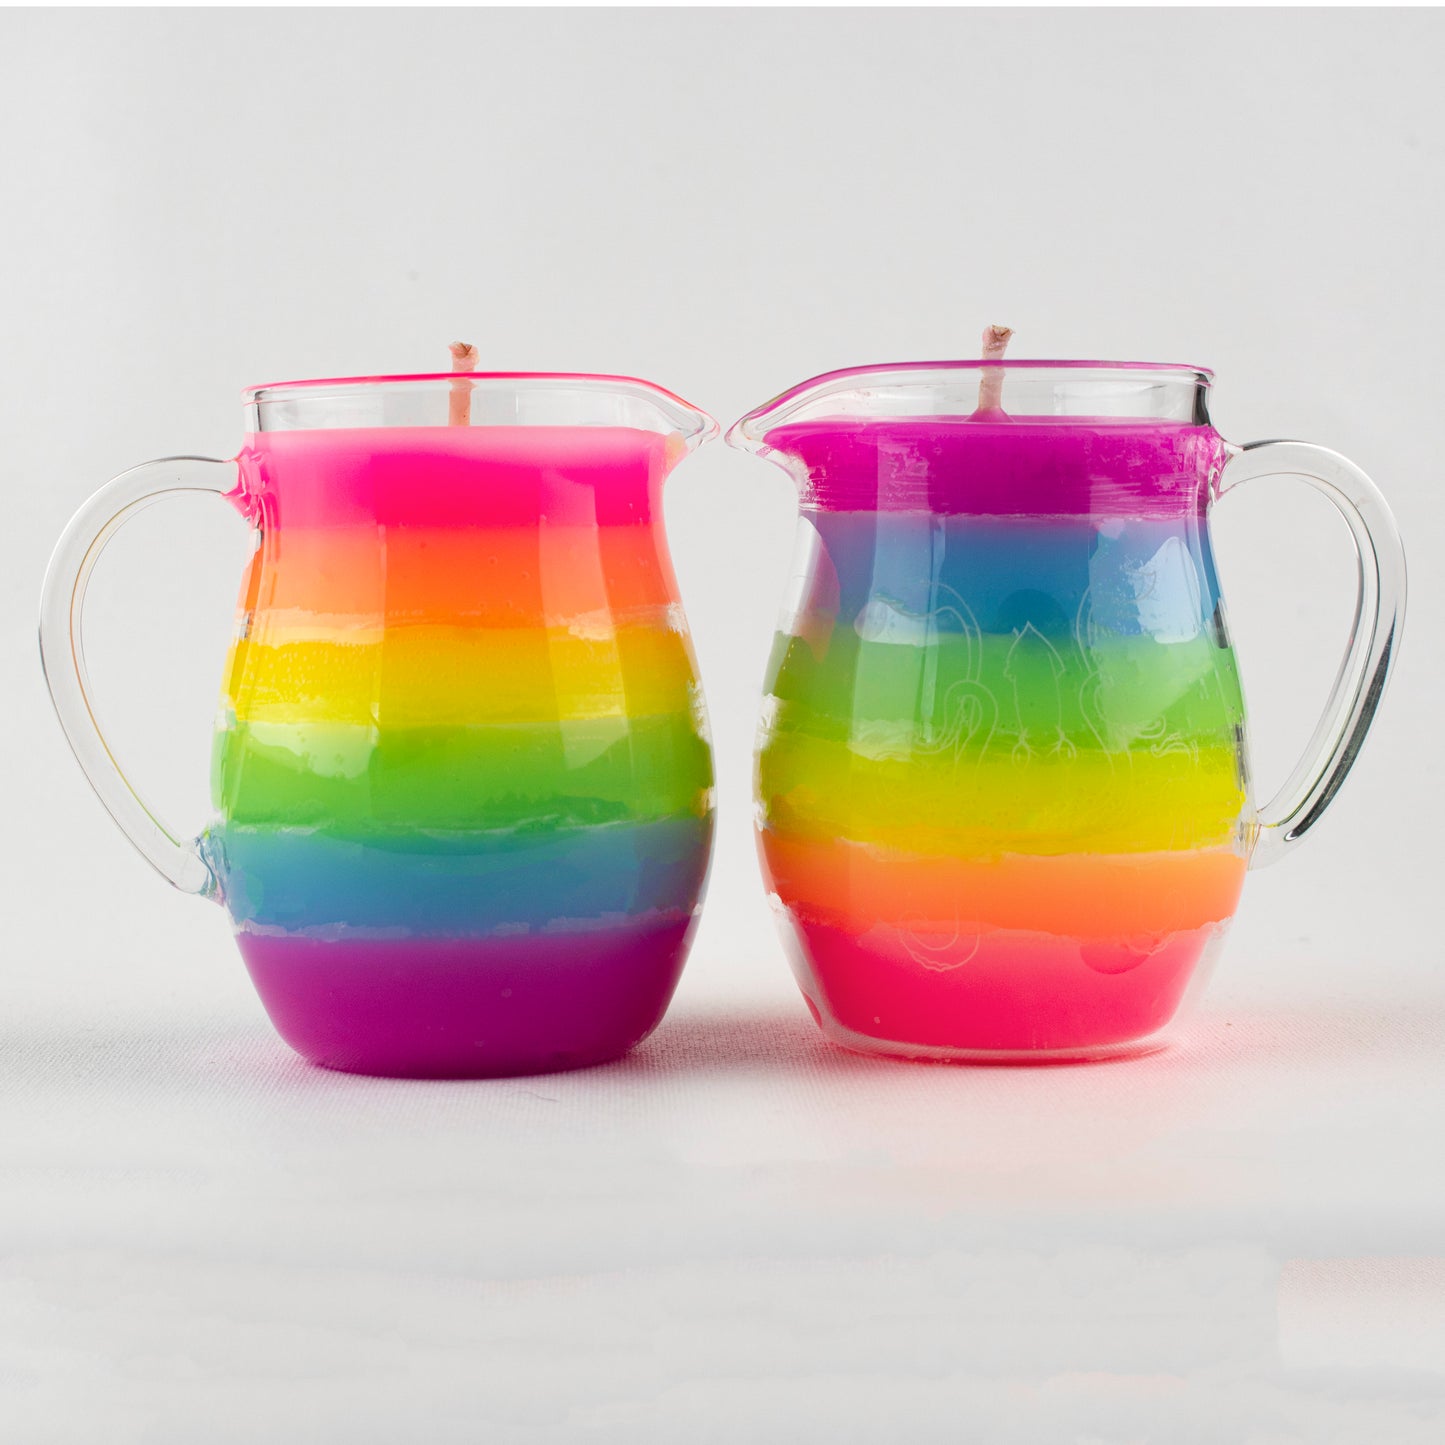 Blacklight Rainbow in a Jar Wax Play Candle - Low Temp - Unscented - UV Reactive Pitcher Candle